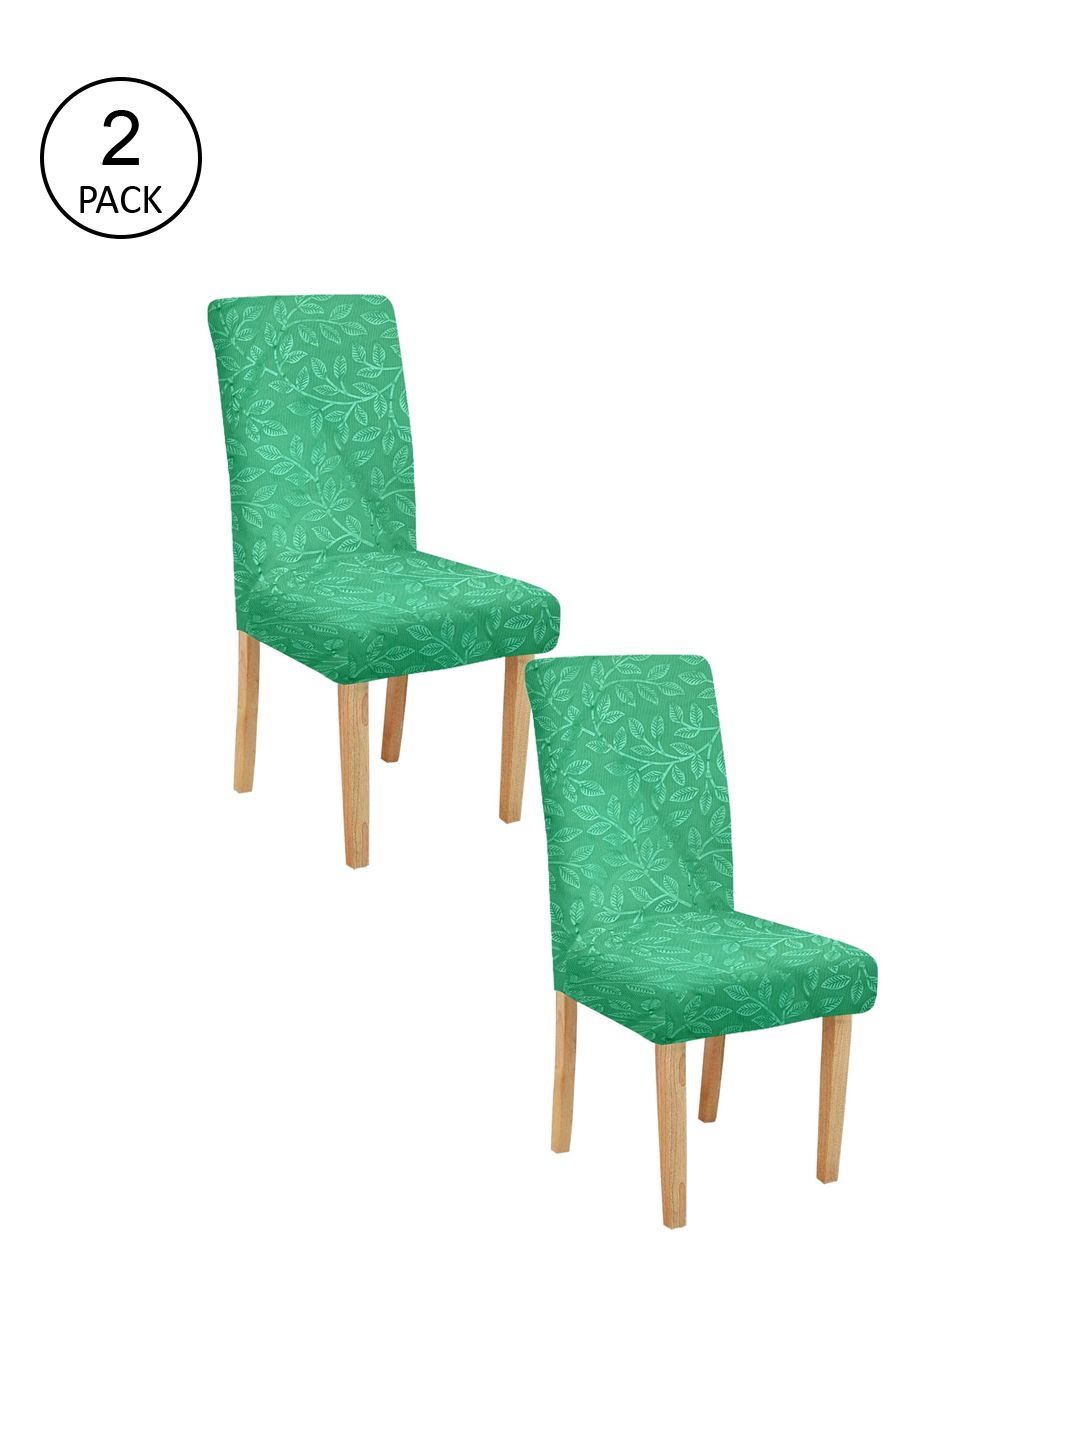 Cortina Set Of 2 Green Printed Chair Covers Price in India